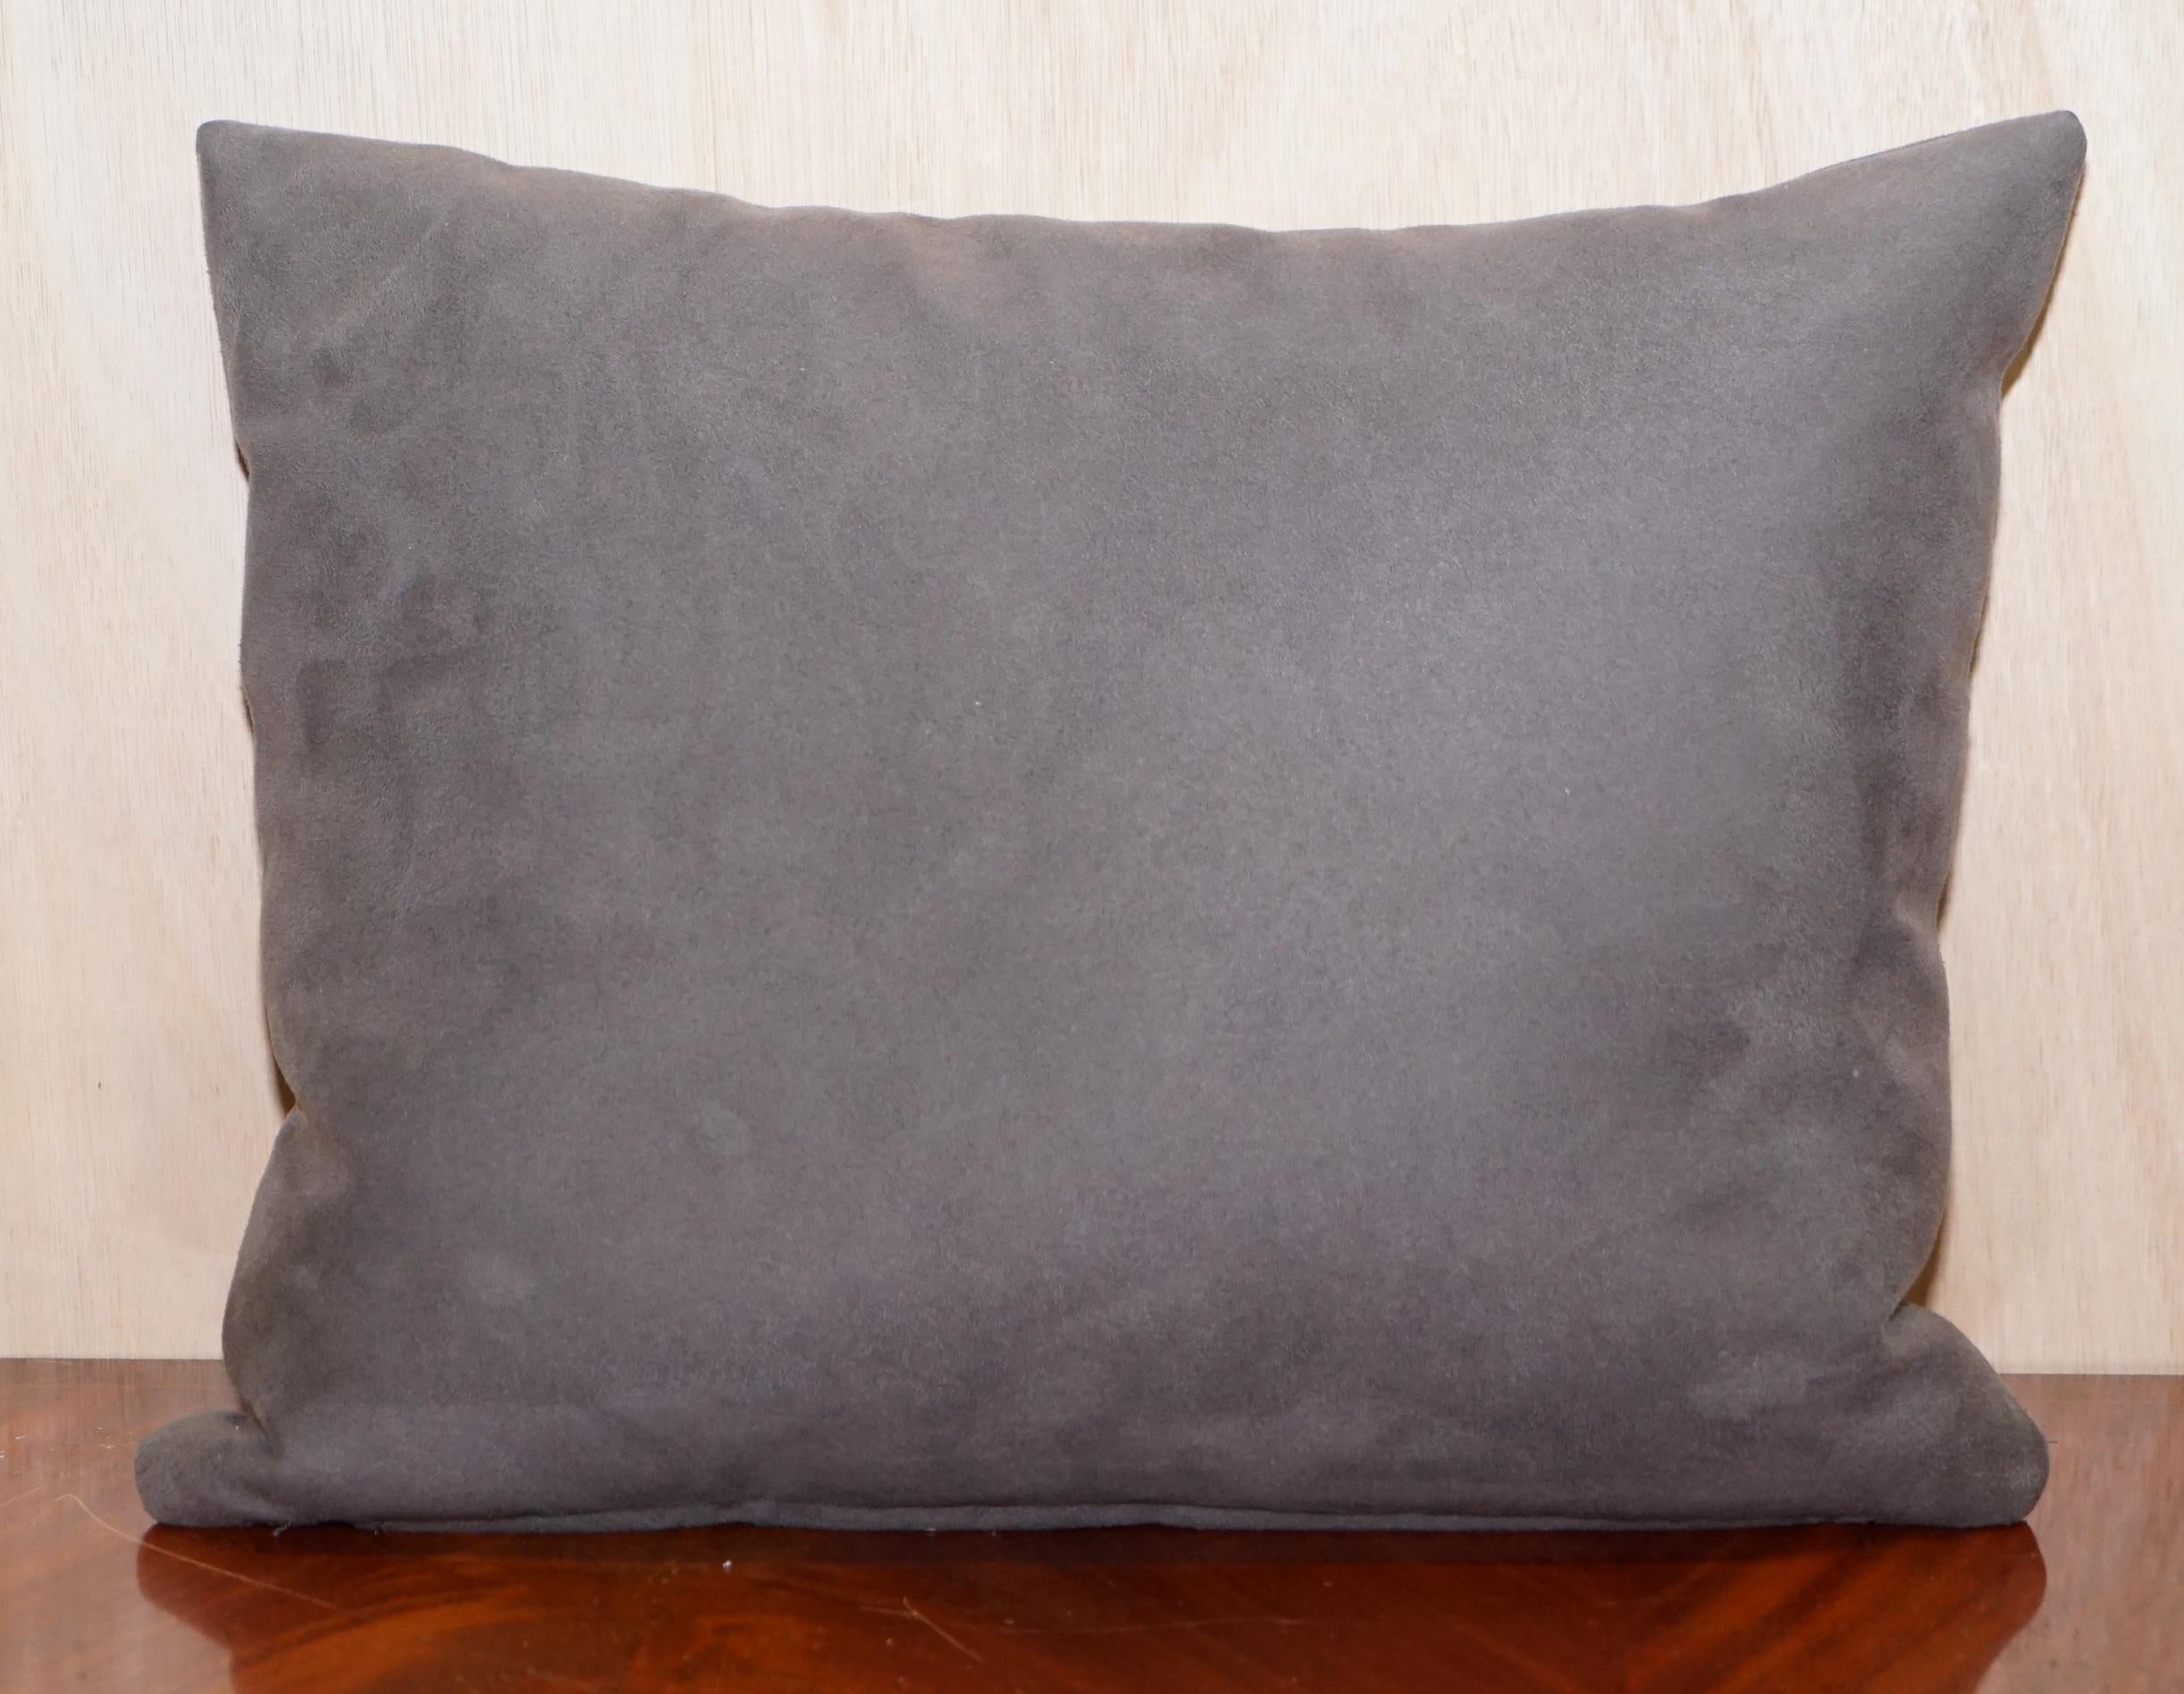 Hand-Crafted Lovely Pair of Soft Suede Large Grey Scatter Cushions from Fendi Sofa